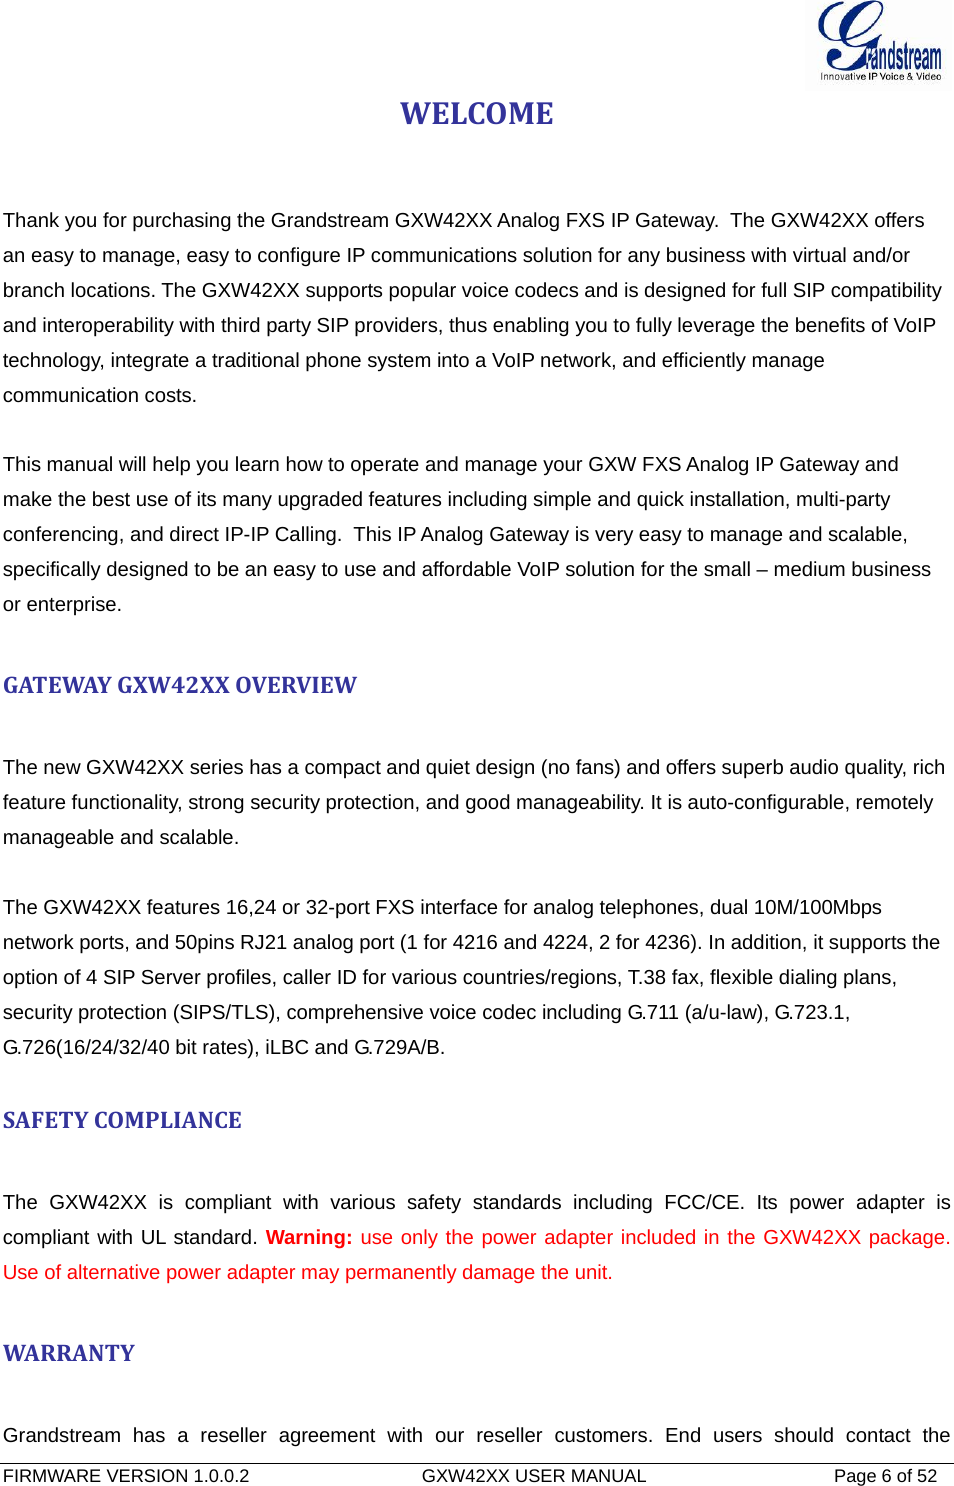  FIRMWARE VERSION 1.0.0.2                                  GXW42XX USER MANUAL                                     Page 6 of 52   WELCOMEThank you for purchasing the Grandstream GXW42XX Analog FXS IP Gateway.  The GXW42XX offers an easy to manage, easy to configure IP communications solution for any business with virtual and/or branch locations. The GXW42XX supports popular voice codecs and is designed for full SIP compatibility and interoperability with third party SIP providers, thus enabling you to fully leverage the benefits of VoIP technology, integrate a traditional phone system into a VoIP network, and efficiently manage communication costs.  This manual will help you learn how to operate and manage your GXW FXS Analog IP Gateway and make the best use of its many upgraded features including simple and quick installation, multi-party conferencing, and direct IP-IP Calling.  This IP Analog Gateway is very easy to manage and scalable, specifically designed to be an easy to use and affordable VoIP solution for the small – medium business or enterprise. GATEWAYGXW42XXOVERVIEWThe new GXW42XX series has a compact and quiet design (no fans) and offers superb audio quality, rich feature functionality, strong security protection, and good manageability. It is auto-configurable, remotely manageable and scalable.  The GXW42XX features 16,24 or 32-port FXS interface for analog telephones, dual 10M/100Mbps network ports, and 50pins RJ21 analog port (1 for 4216 and 4224, 2 for 4236). In addition, it supports the option of 4 SIP Server profiles, caller ID for various countries/regions, T.38 fax, flexible dialing plans, security protection (SIPS/TLS), comprehensive voice codec including G.711 (a/u-law), G.723.1, G.726(16/24/32/40 bit rates), iLBC and G.729A/B.  SAFETYCOMPLIANCEThe GXW42XX is compliant with various safety standards including FCC/CE. Its power adapter is compliant with UL standard. Warning: use only the power adapter included in the GXW42XX package.  Use of alternative power adapter may permanently damage the unit. WARRANTYGrandstream has a reseller agreement with our reseller customers. End users should contact the 